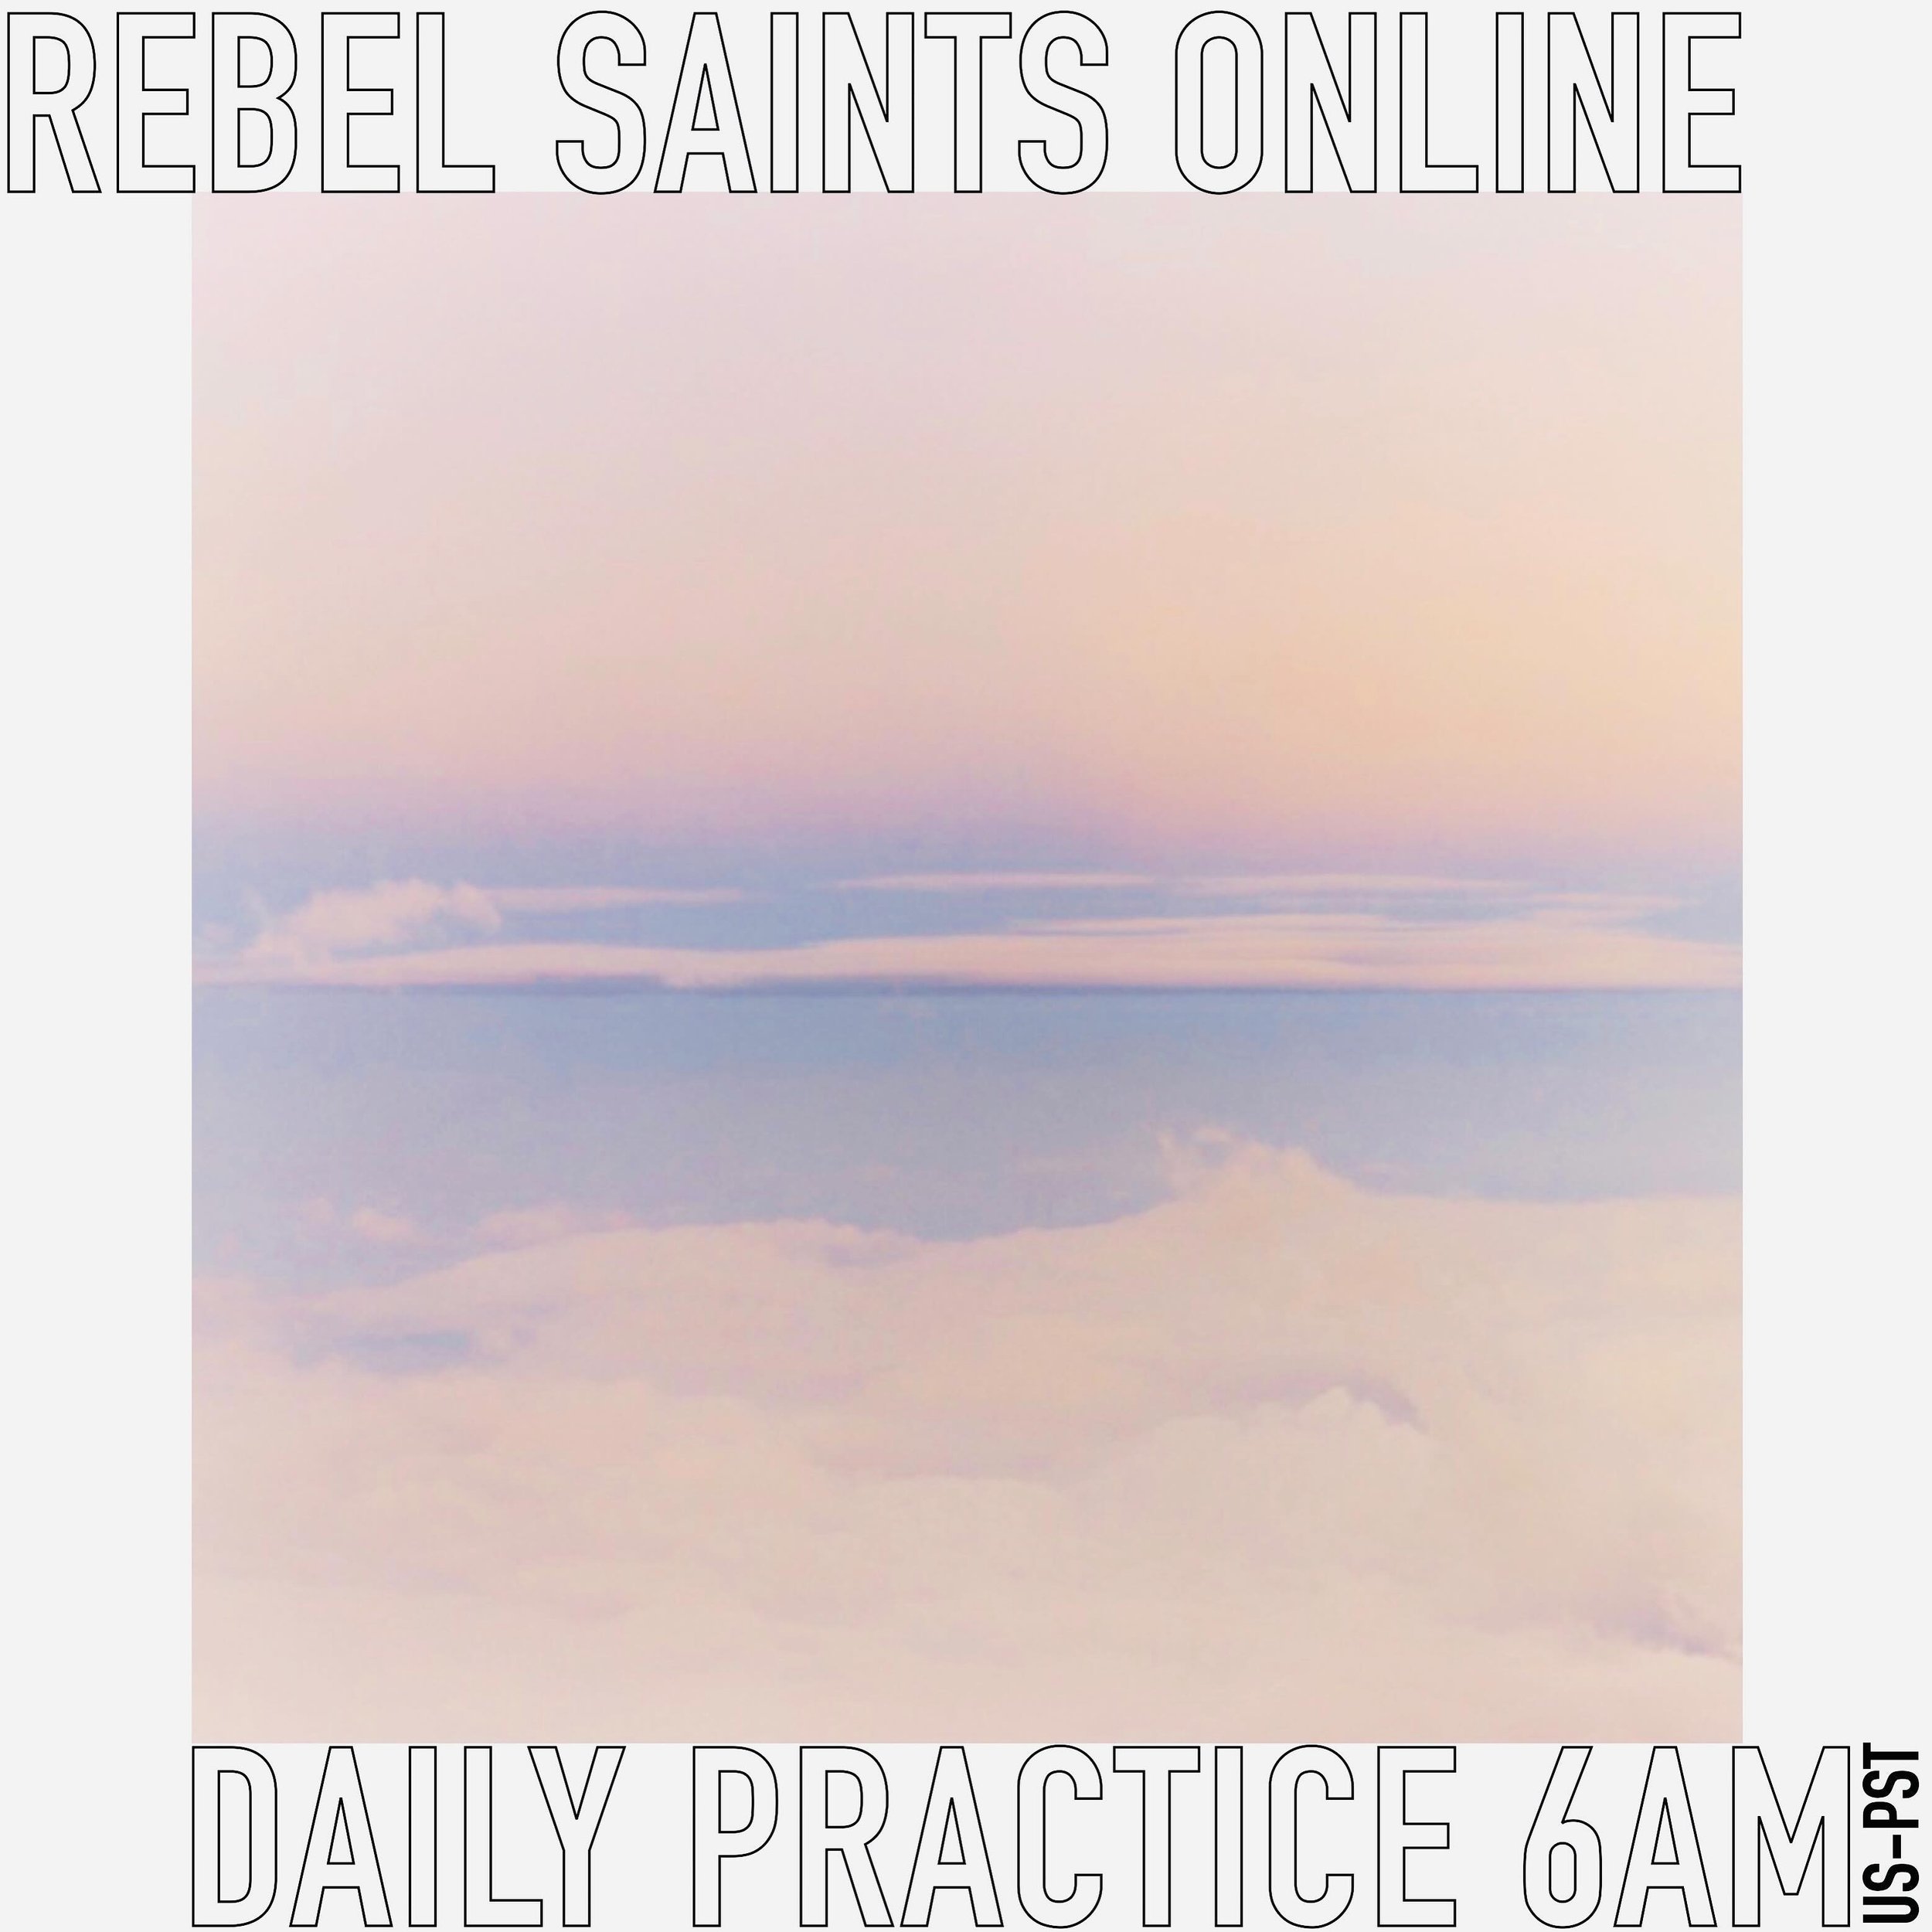 Morning Meditation Practice for everyone. Rebel Saints leads the classic and powerful mindfulness practices for thirty minutes M-F, for forty five minutes on Saturday and we offer a Live Talk+Meditation with Rachael Savage on Sundays at 10:30. If you